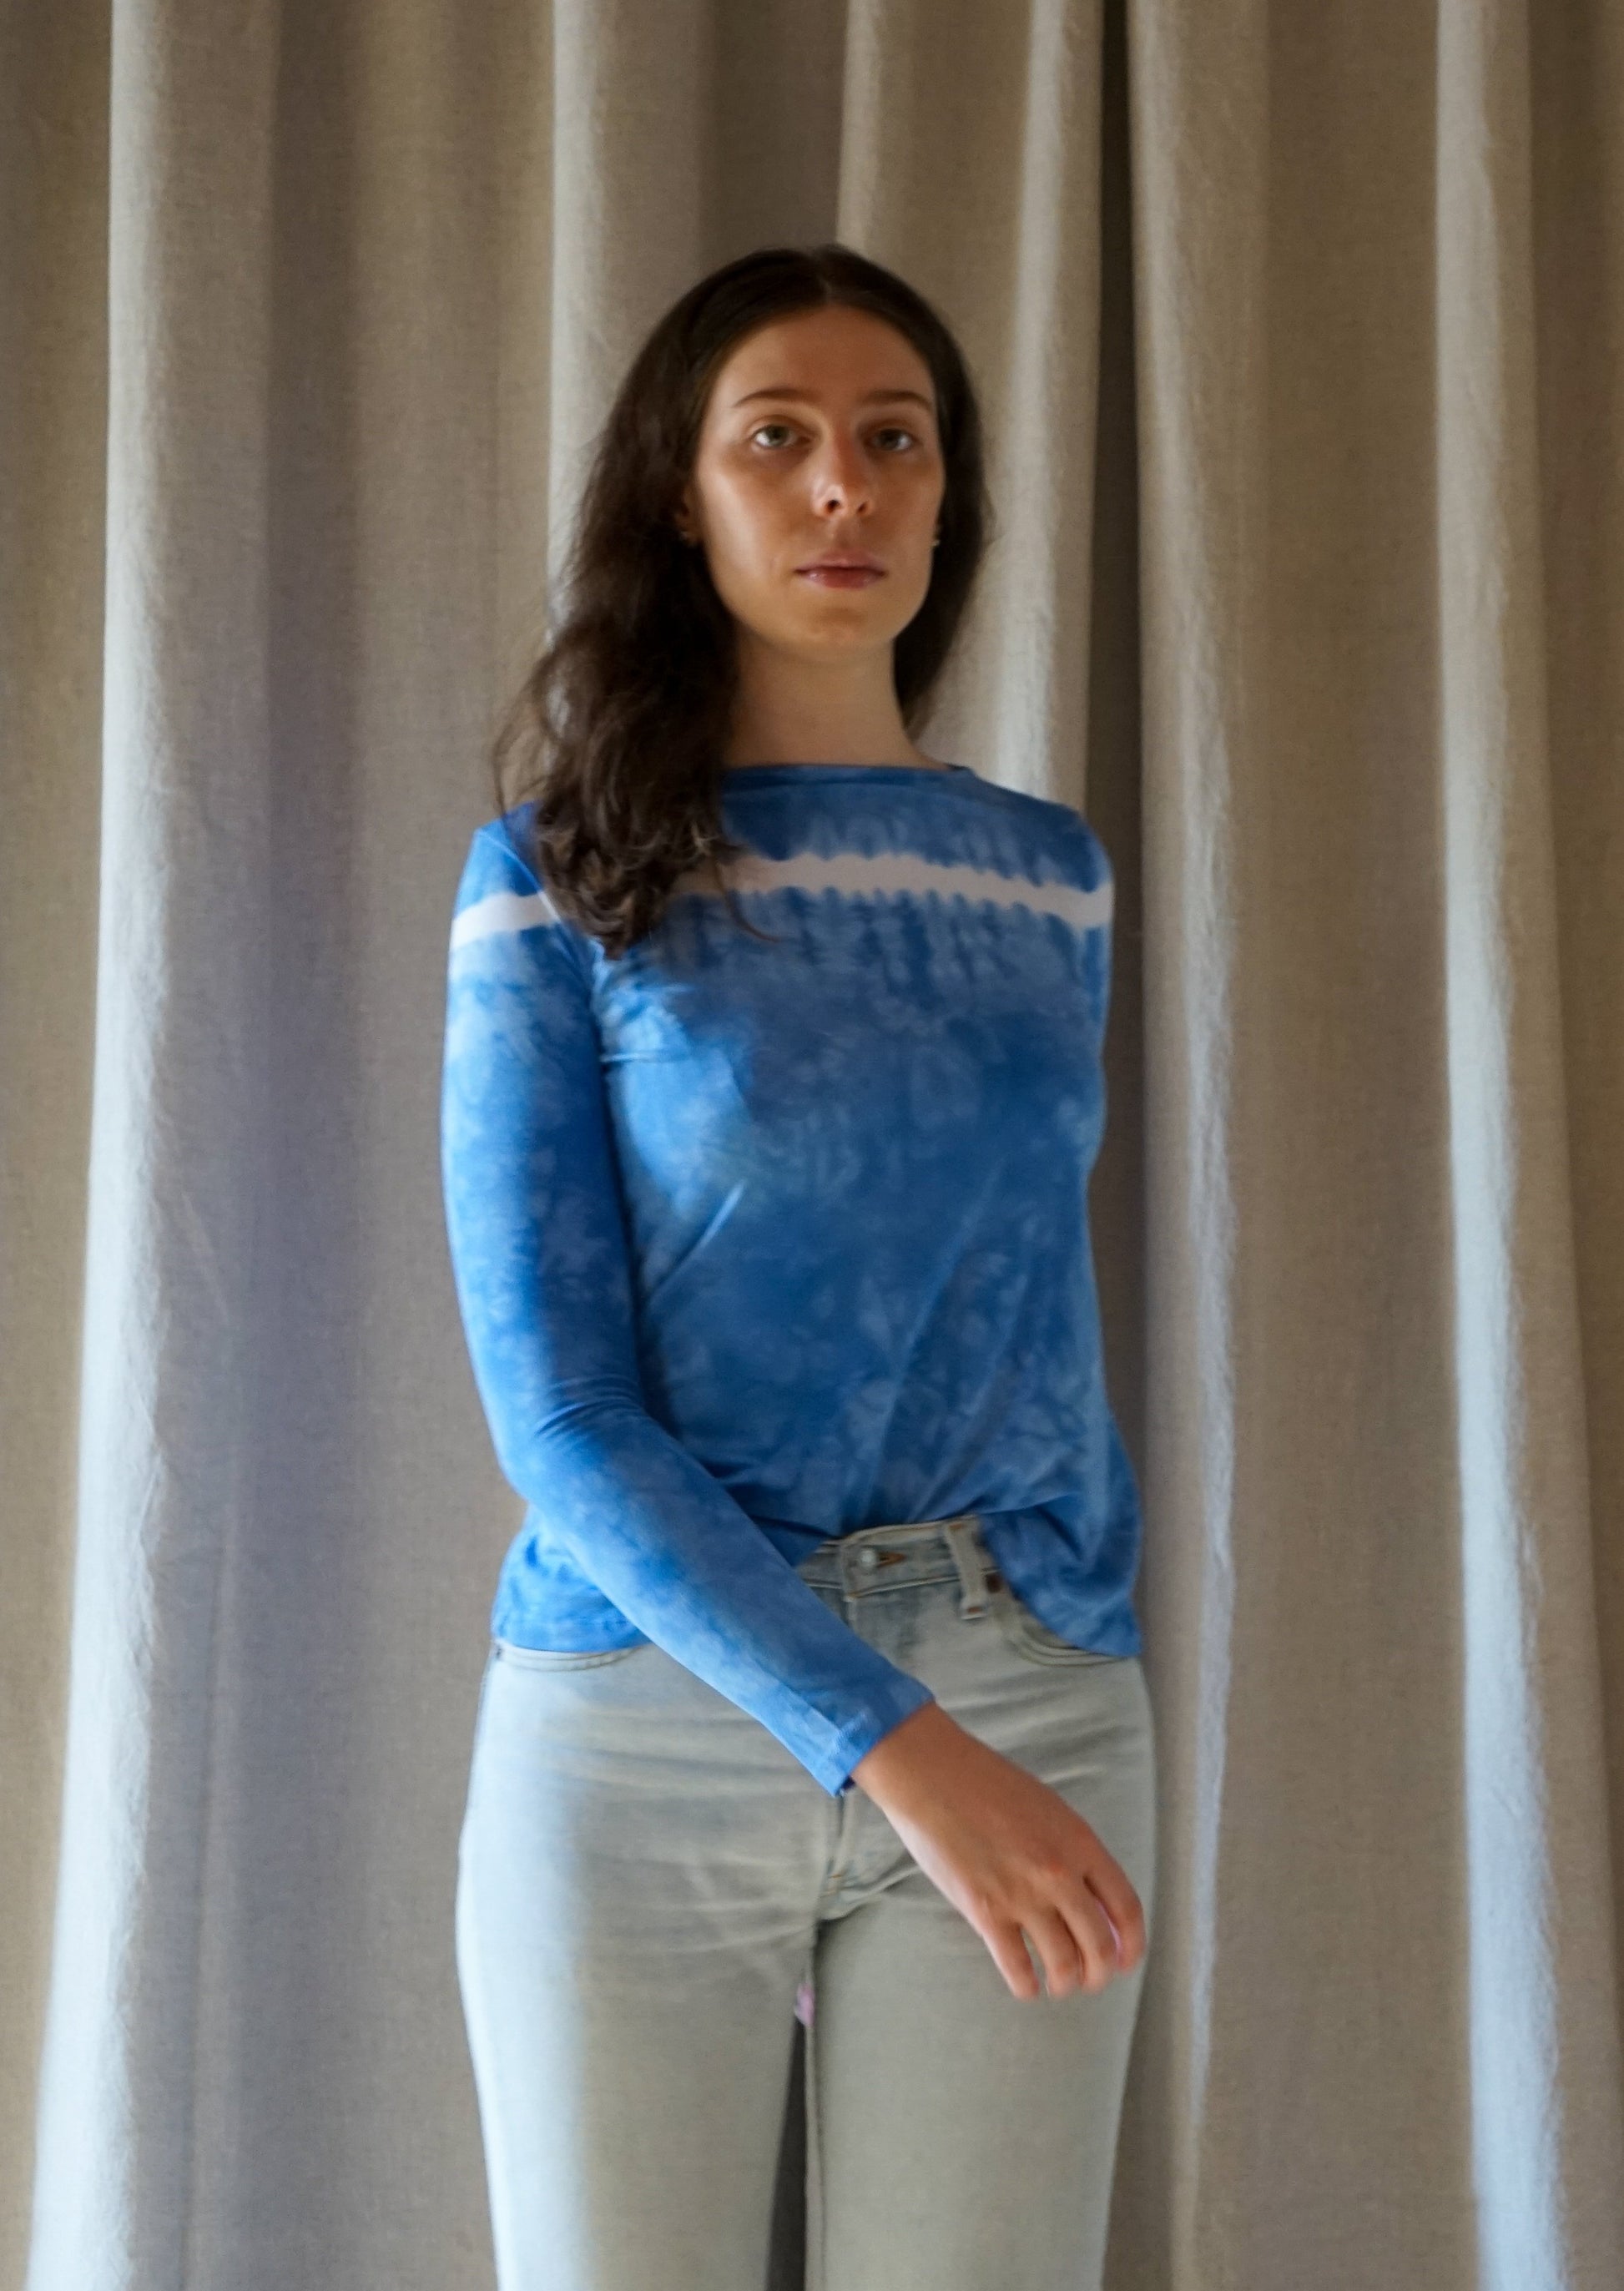 Annie Turbin Tie Dye Hand Dyed Natural Dye Long Sleeve Relaxed Boat Neck Tee Shirt Organic Cotton